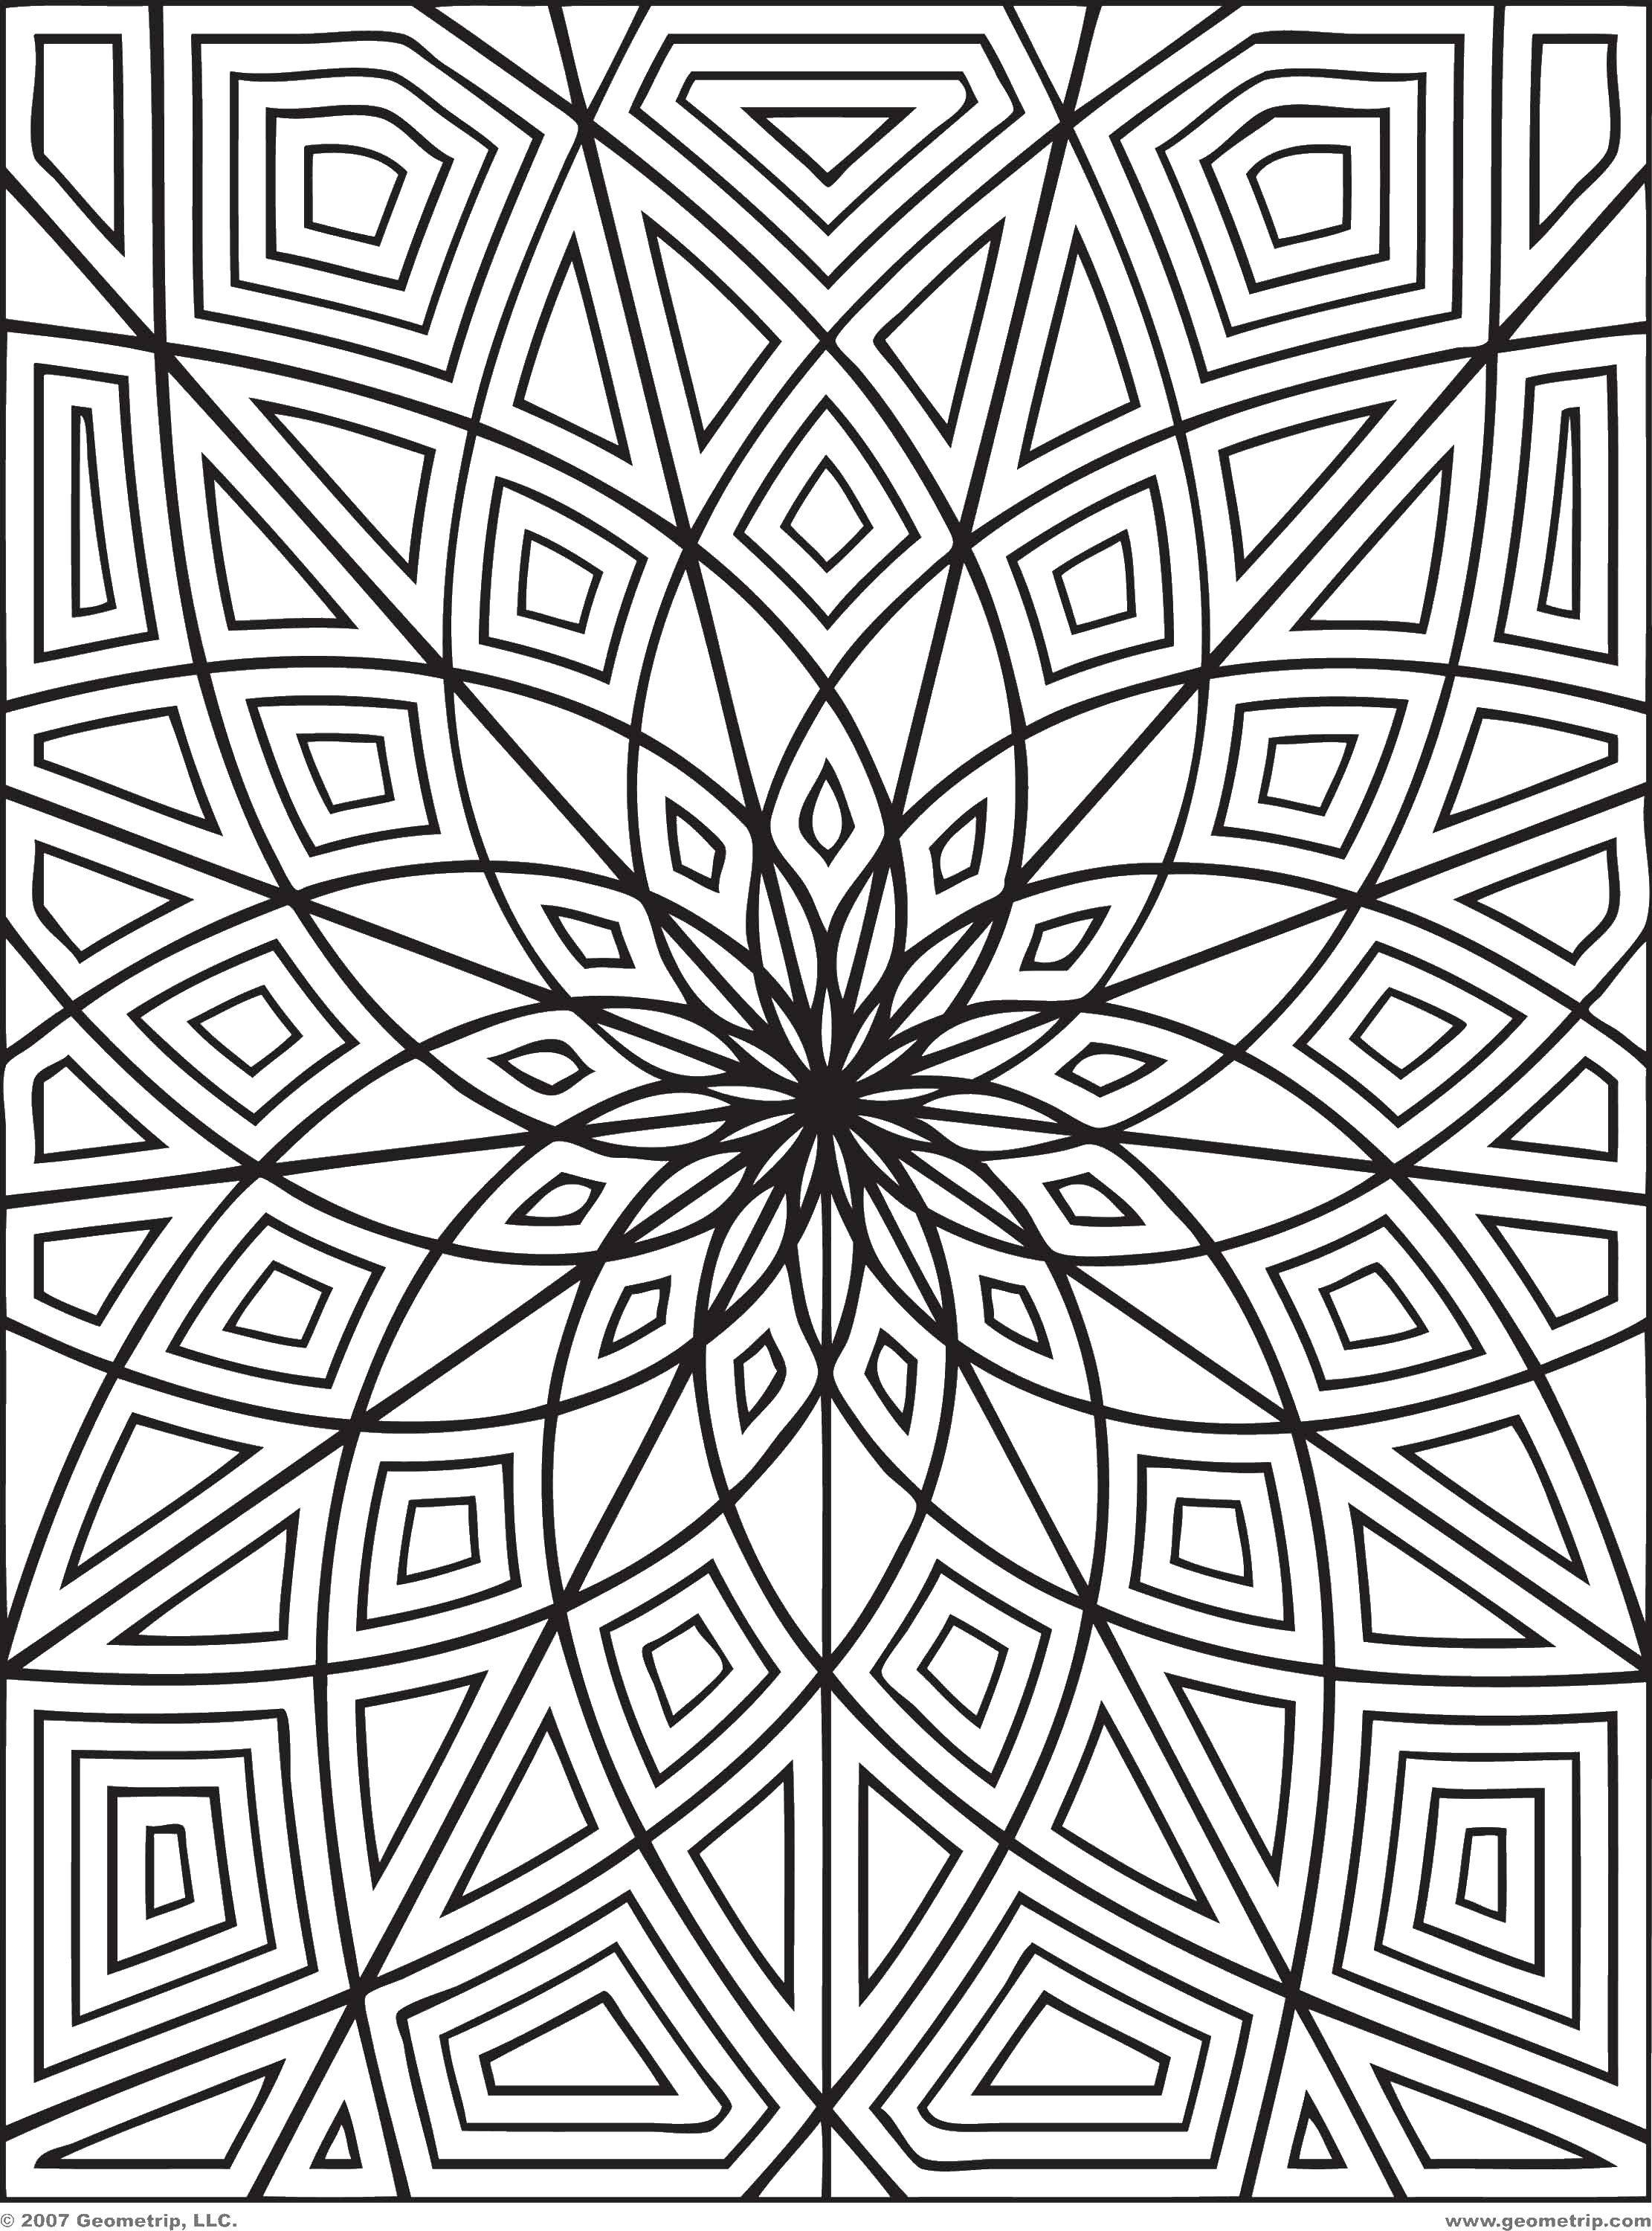 Coloring Geometric flower. Category patterns. Tags:  Patterns, geometric.